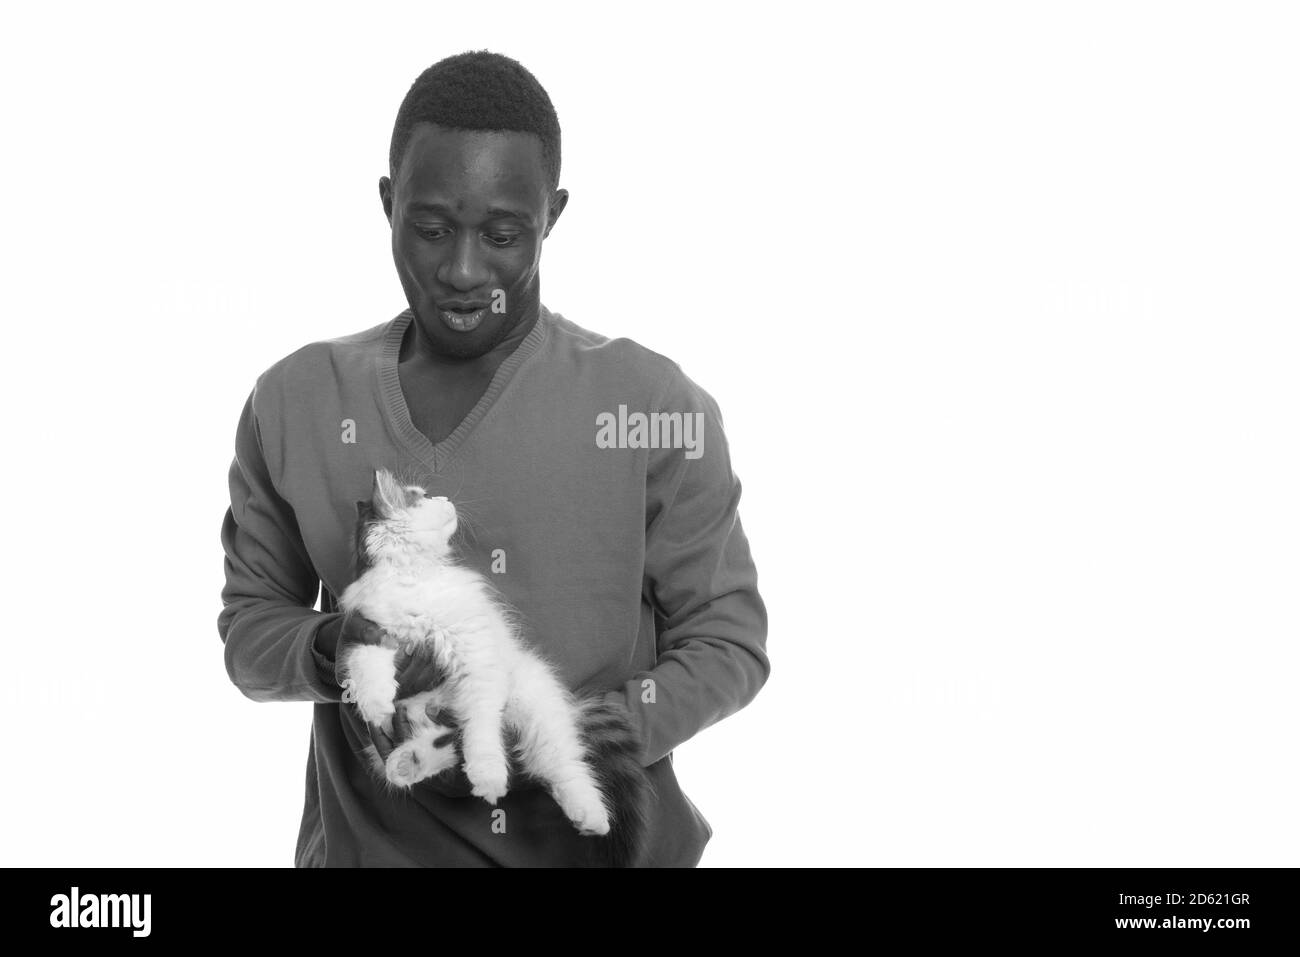 Young African man making funny face while holding cute cat Stock Photo